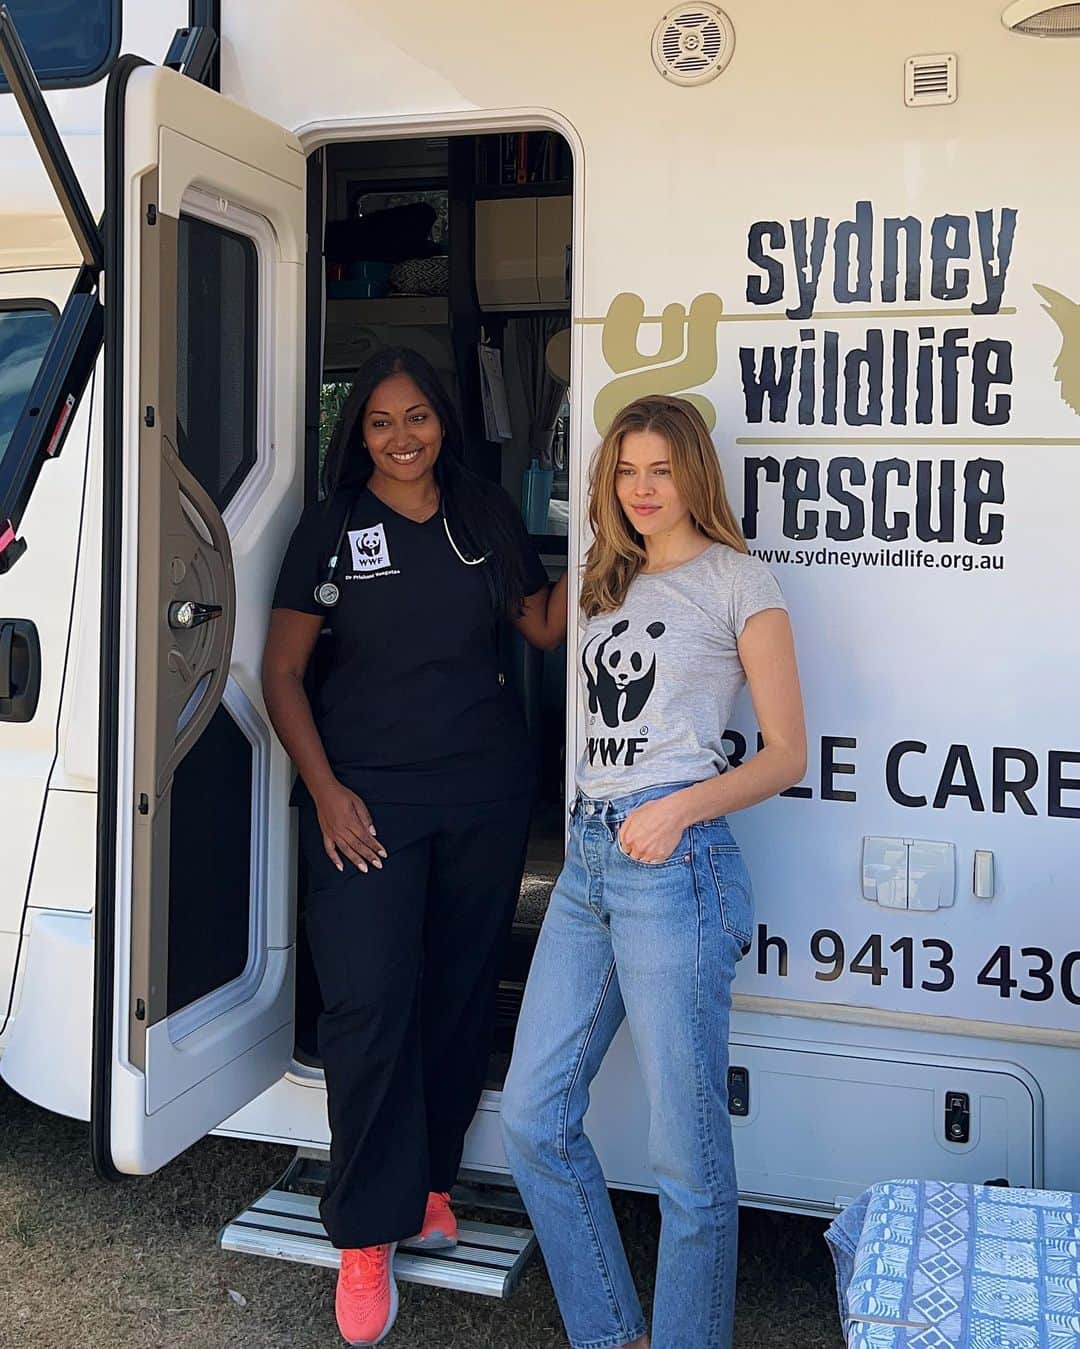 Victoria Leeのインスタグラム：「🌿Last week I had the opportunity to travel to Narrabeen with @wwf_australia to visit @sydneywildliferescue ‘s Mobile Care Unit and meet the incredible team of volunteers, vets and a few of the native animals that were in for treatment.  It was so inspiring to see first hand the love and care the team selflessly provide the most vulnerable of our native wildlife (ie two beautiful orphaned baby Brushtail possums, an under the weather water dragon and a rainbow lorikeet with a bad wing).   Sydney Wildlife Rescue is a fantastic organisation that works to rescue and care for sick, injured and orphaned native wildlife and safely release them back into the wild. Along with educating communities about protecting our native wildlife and preserving their habitats.  Run by passionate volunteers who donate their time, skills and homes to care for and rehabilitate the animals that come into care, funding is 100% donation based and has been under immense pressure following the most recent floods and prior to that, the bushfires of 2019/20.   To learn more, make a donation or become a volunteer (Sydney Wildlife Rescue operate in the Sydney metropolitan area) visit sydneywildlife.org.au.   💚They also provide a 24/7 rescue hotline - 02 9413 4300 (great to keep in mind heading into the holiday period when many of us will be in the road).   Thank you for having me @doctor.prish @sydneywildliferescue @wwf_australia 💚  #regenerateaustralia」